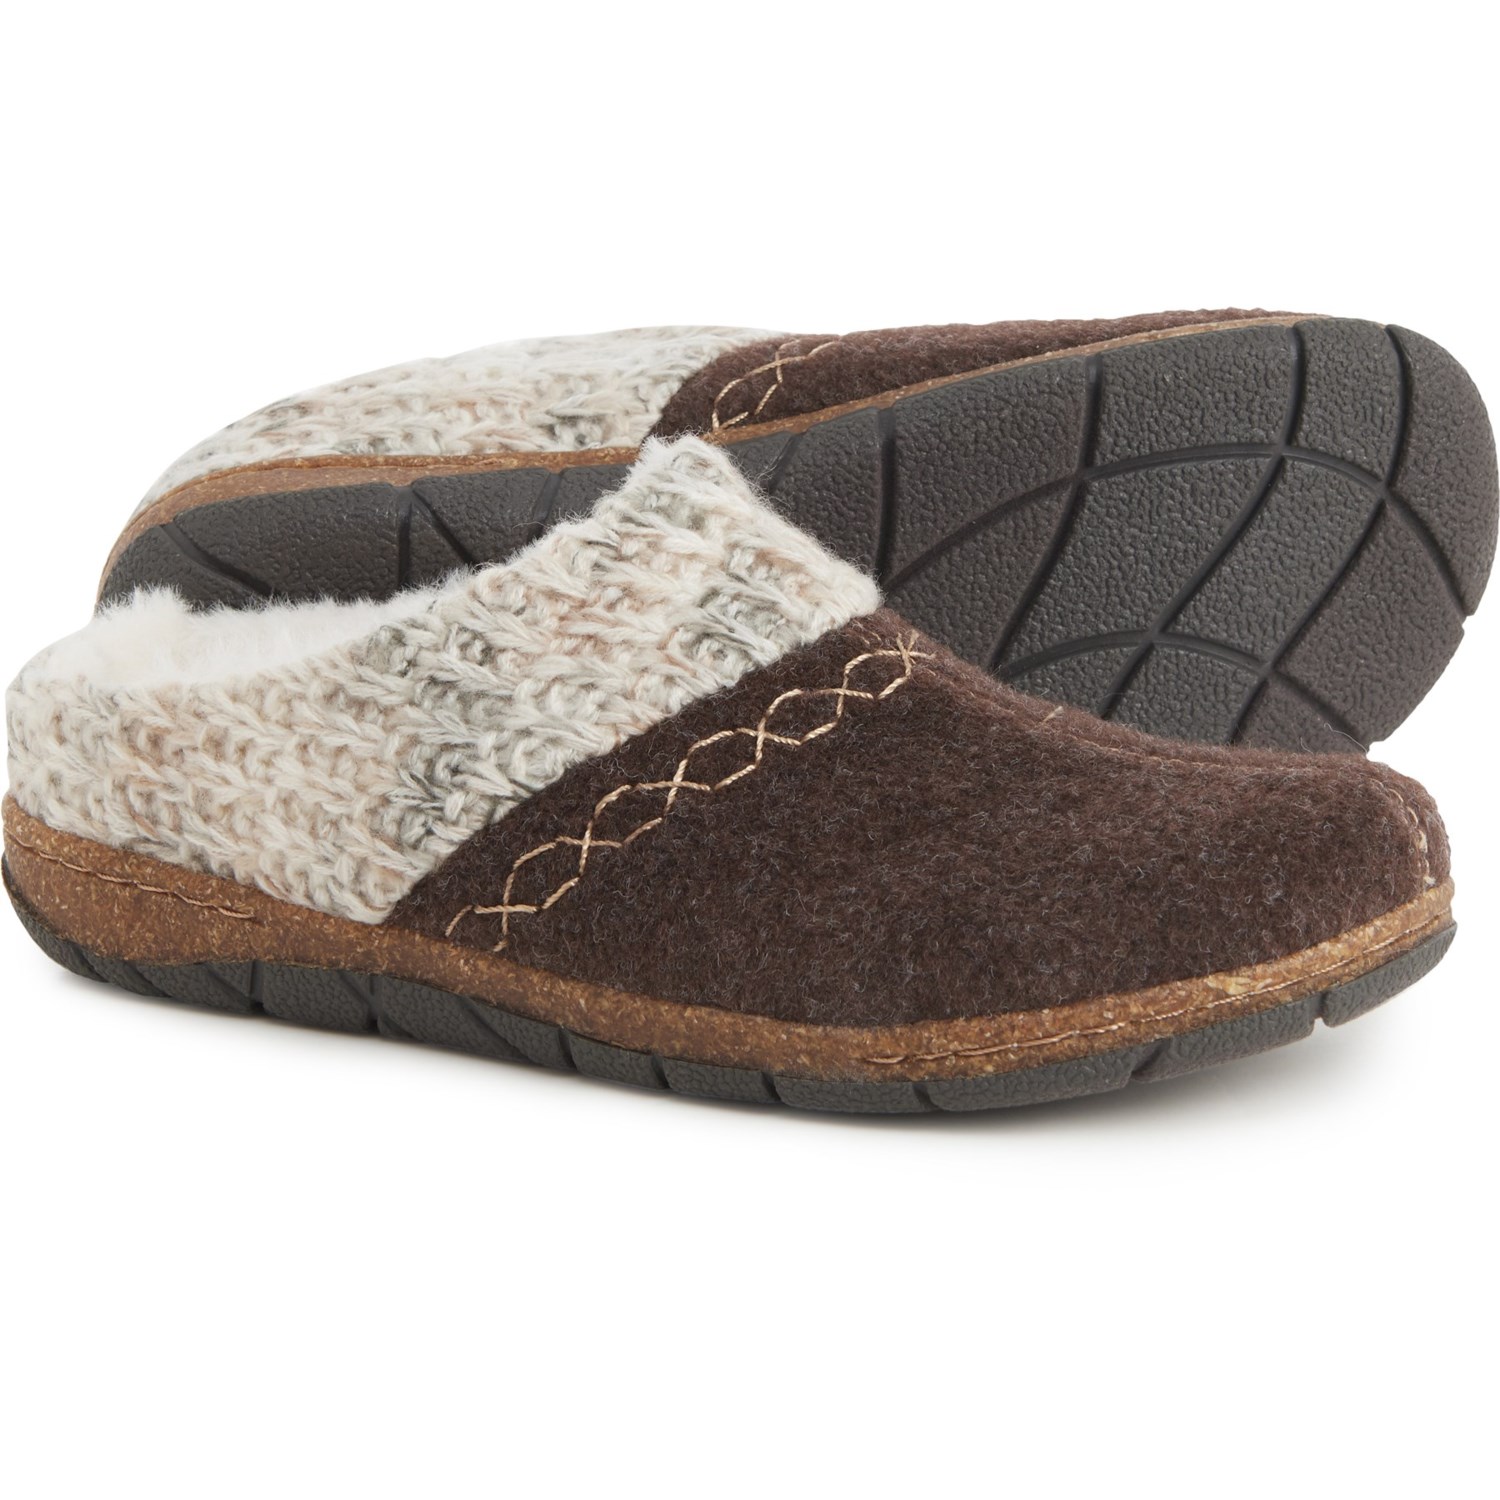 Earth Origins Elana Sweater-Knit Clogs (For Women) - Save 28%